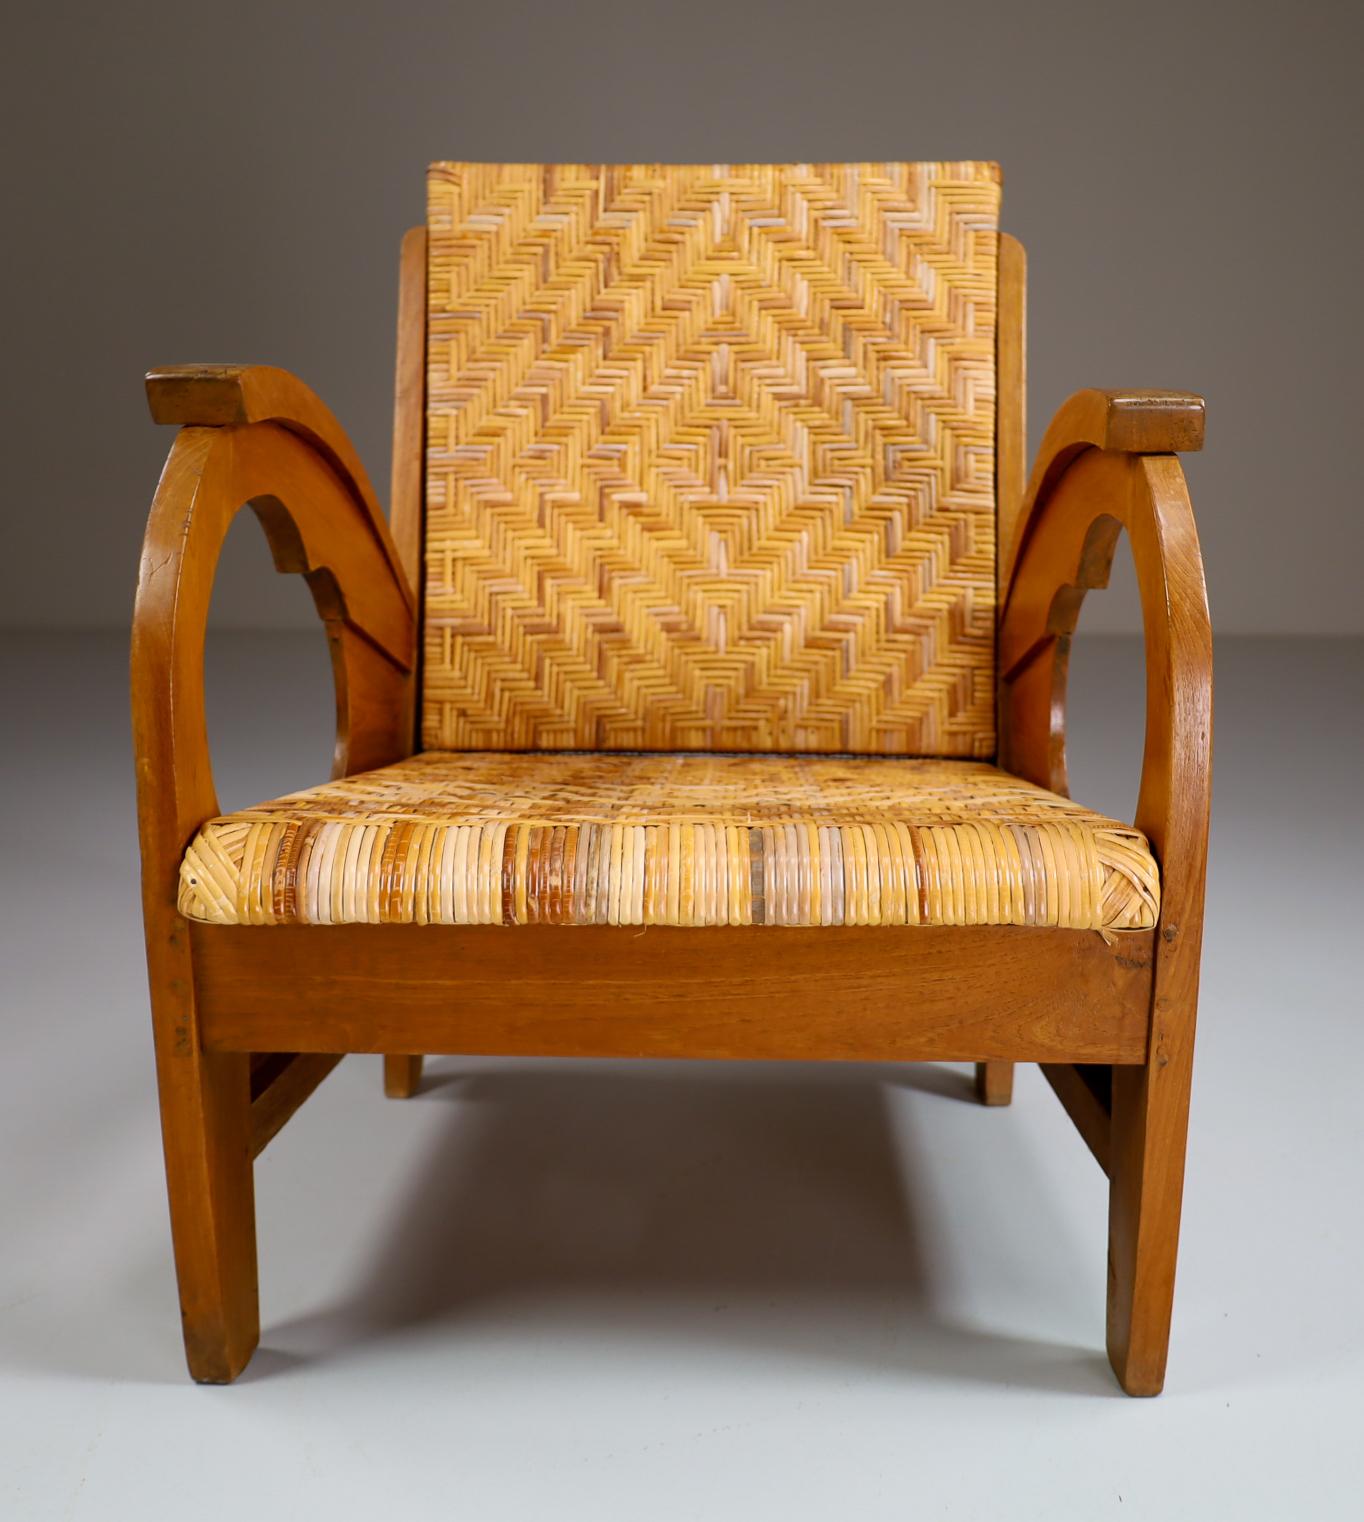 Cane British Colonial Rattan and Wood Art Deco Arm Chair, India, 1920s For Sale